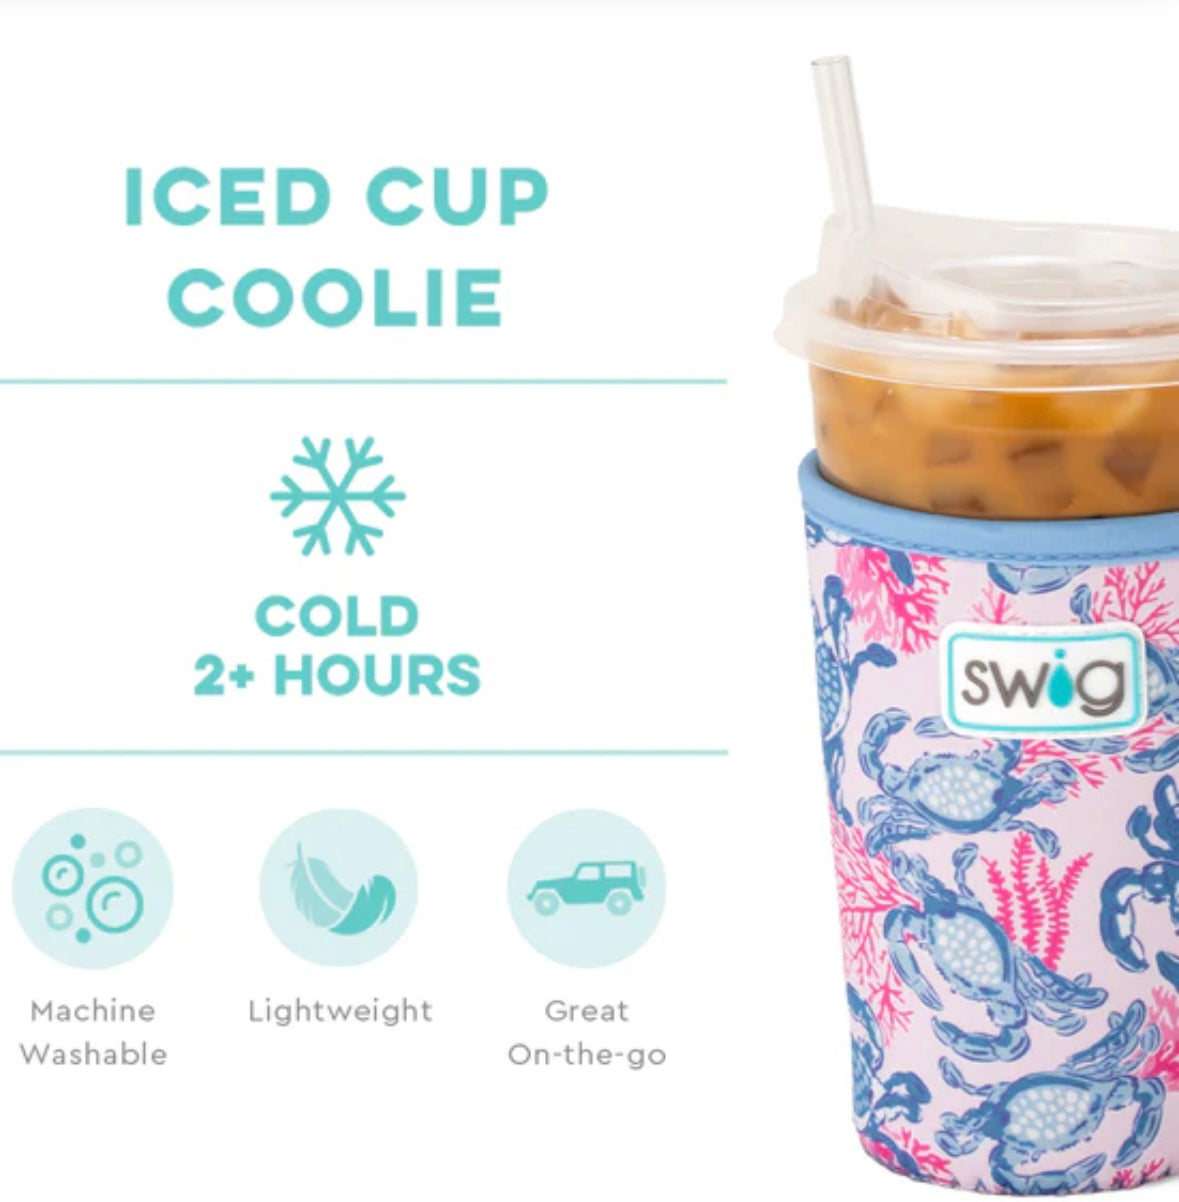 GET CRACKIN'
Iced Cup Coolie